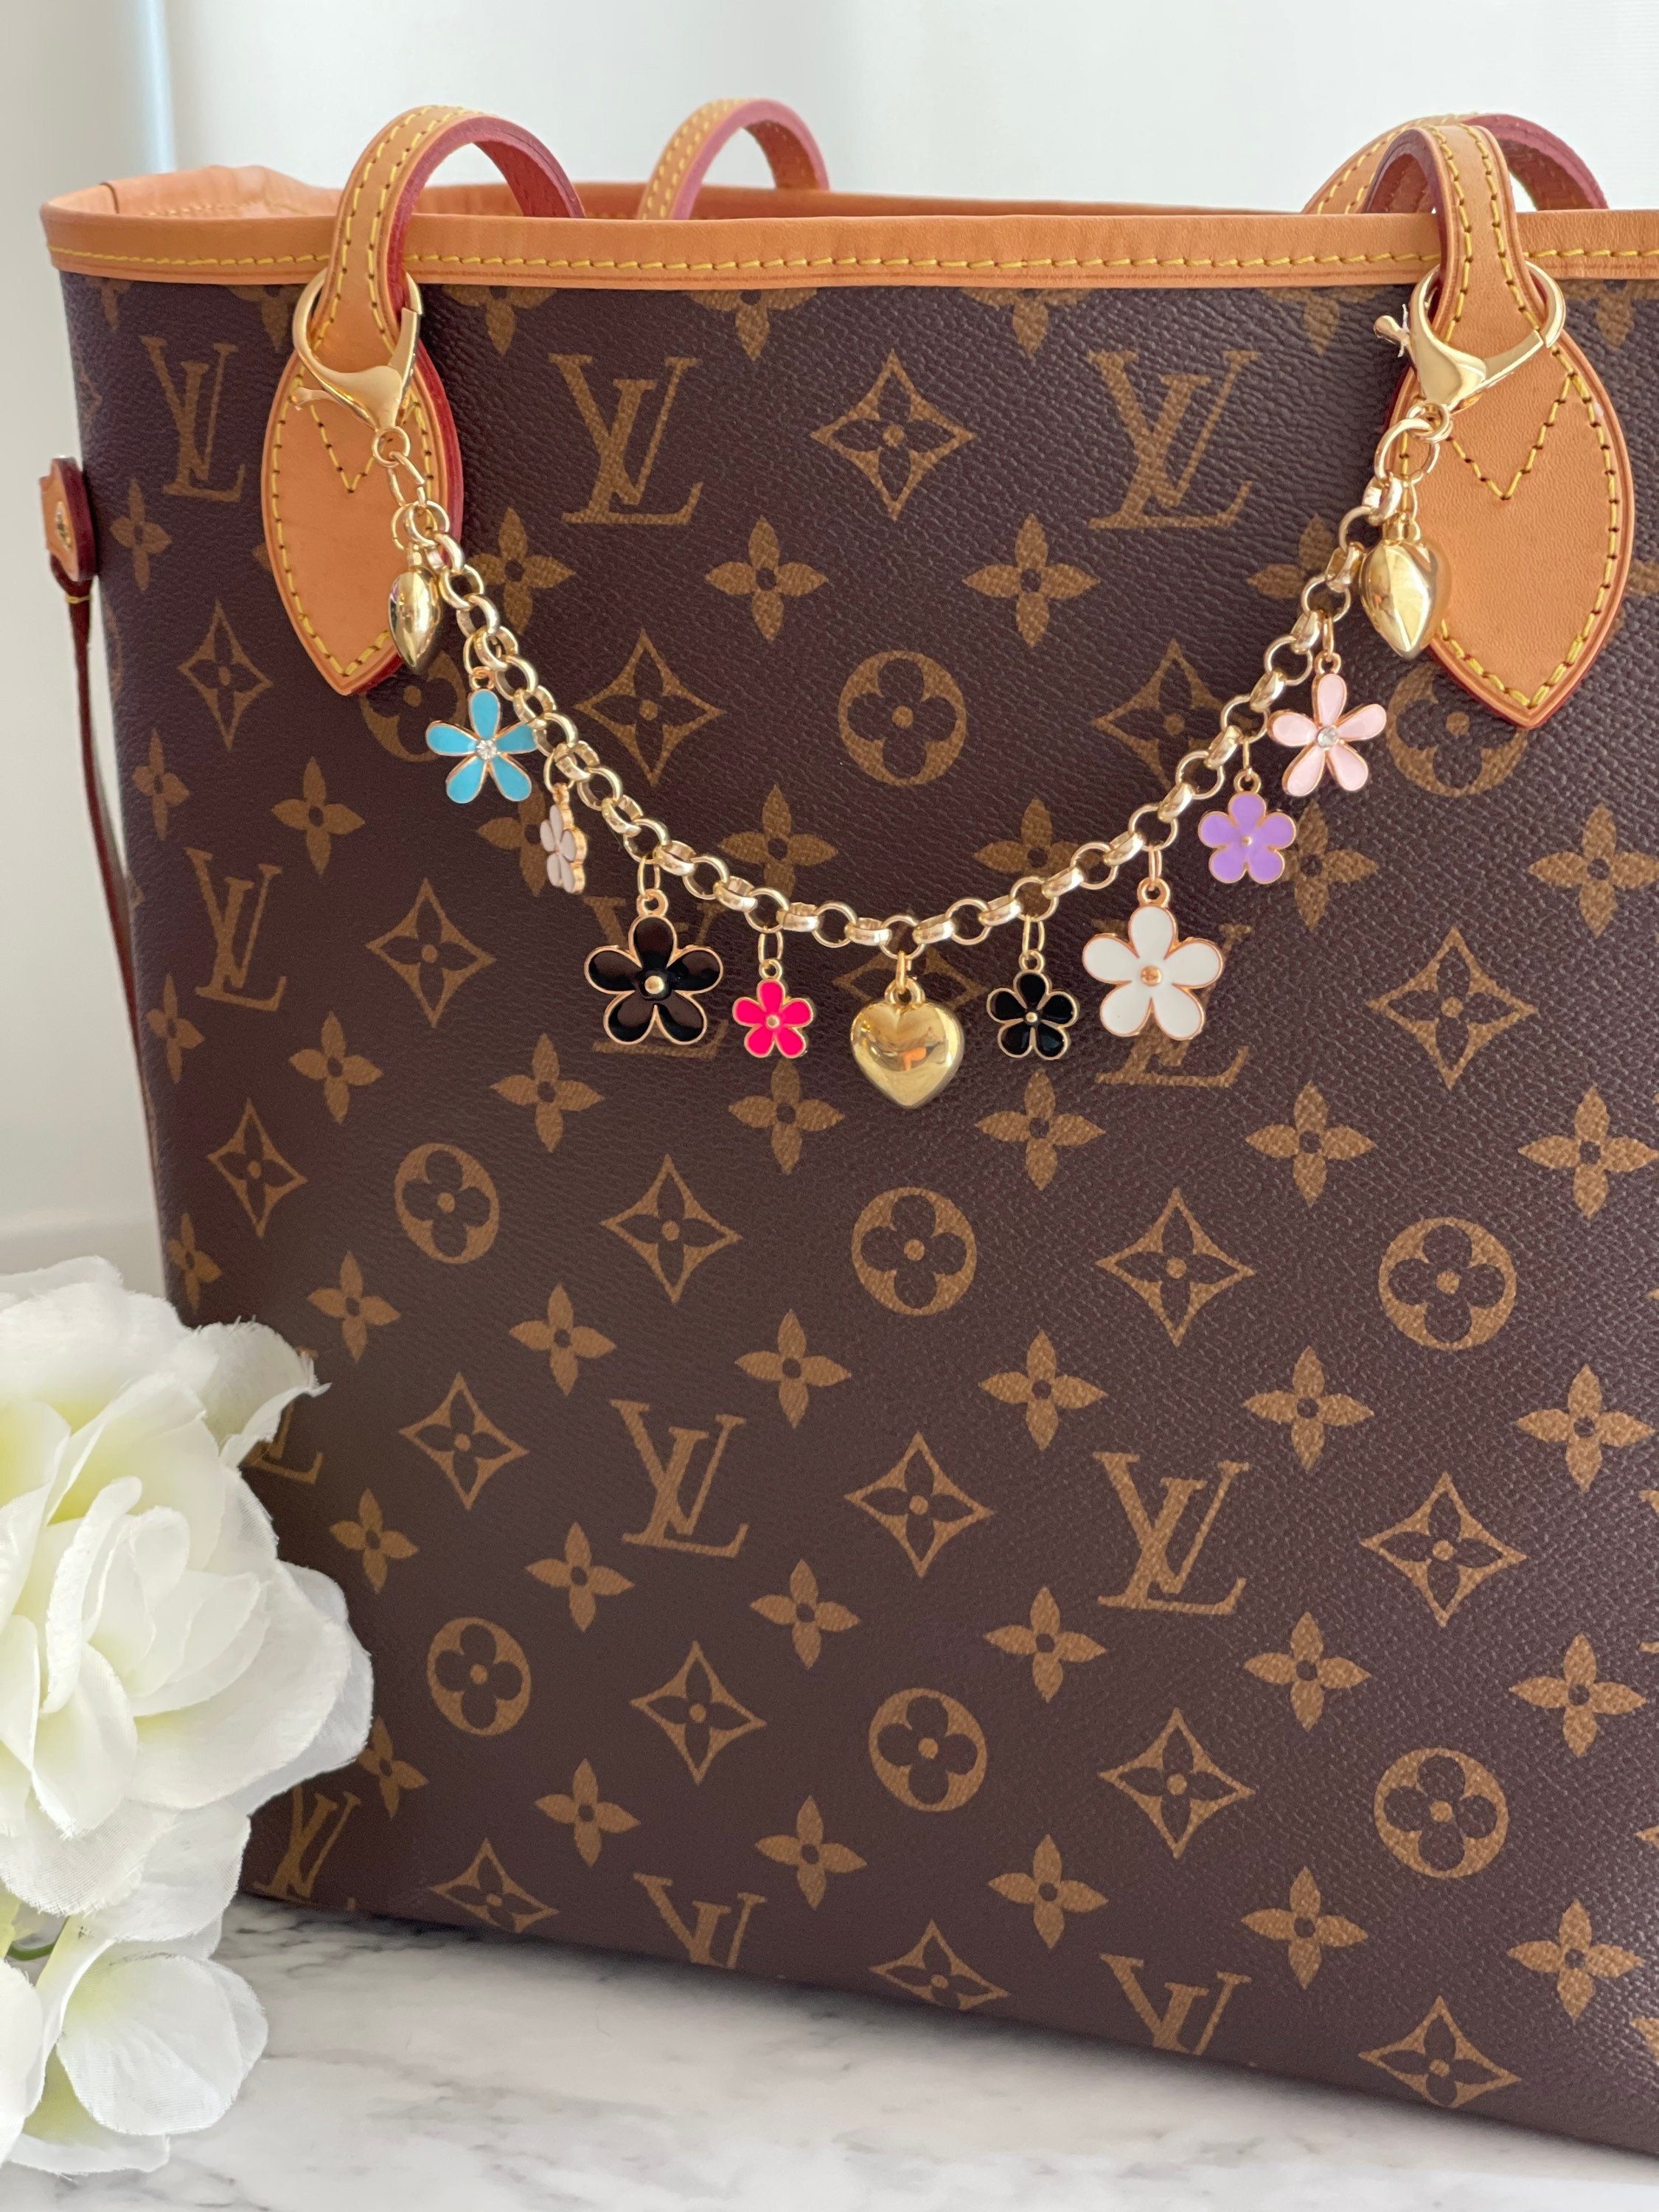 Multi Color Floral With Gold Hearts Chain Bag Charm. 